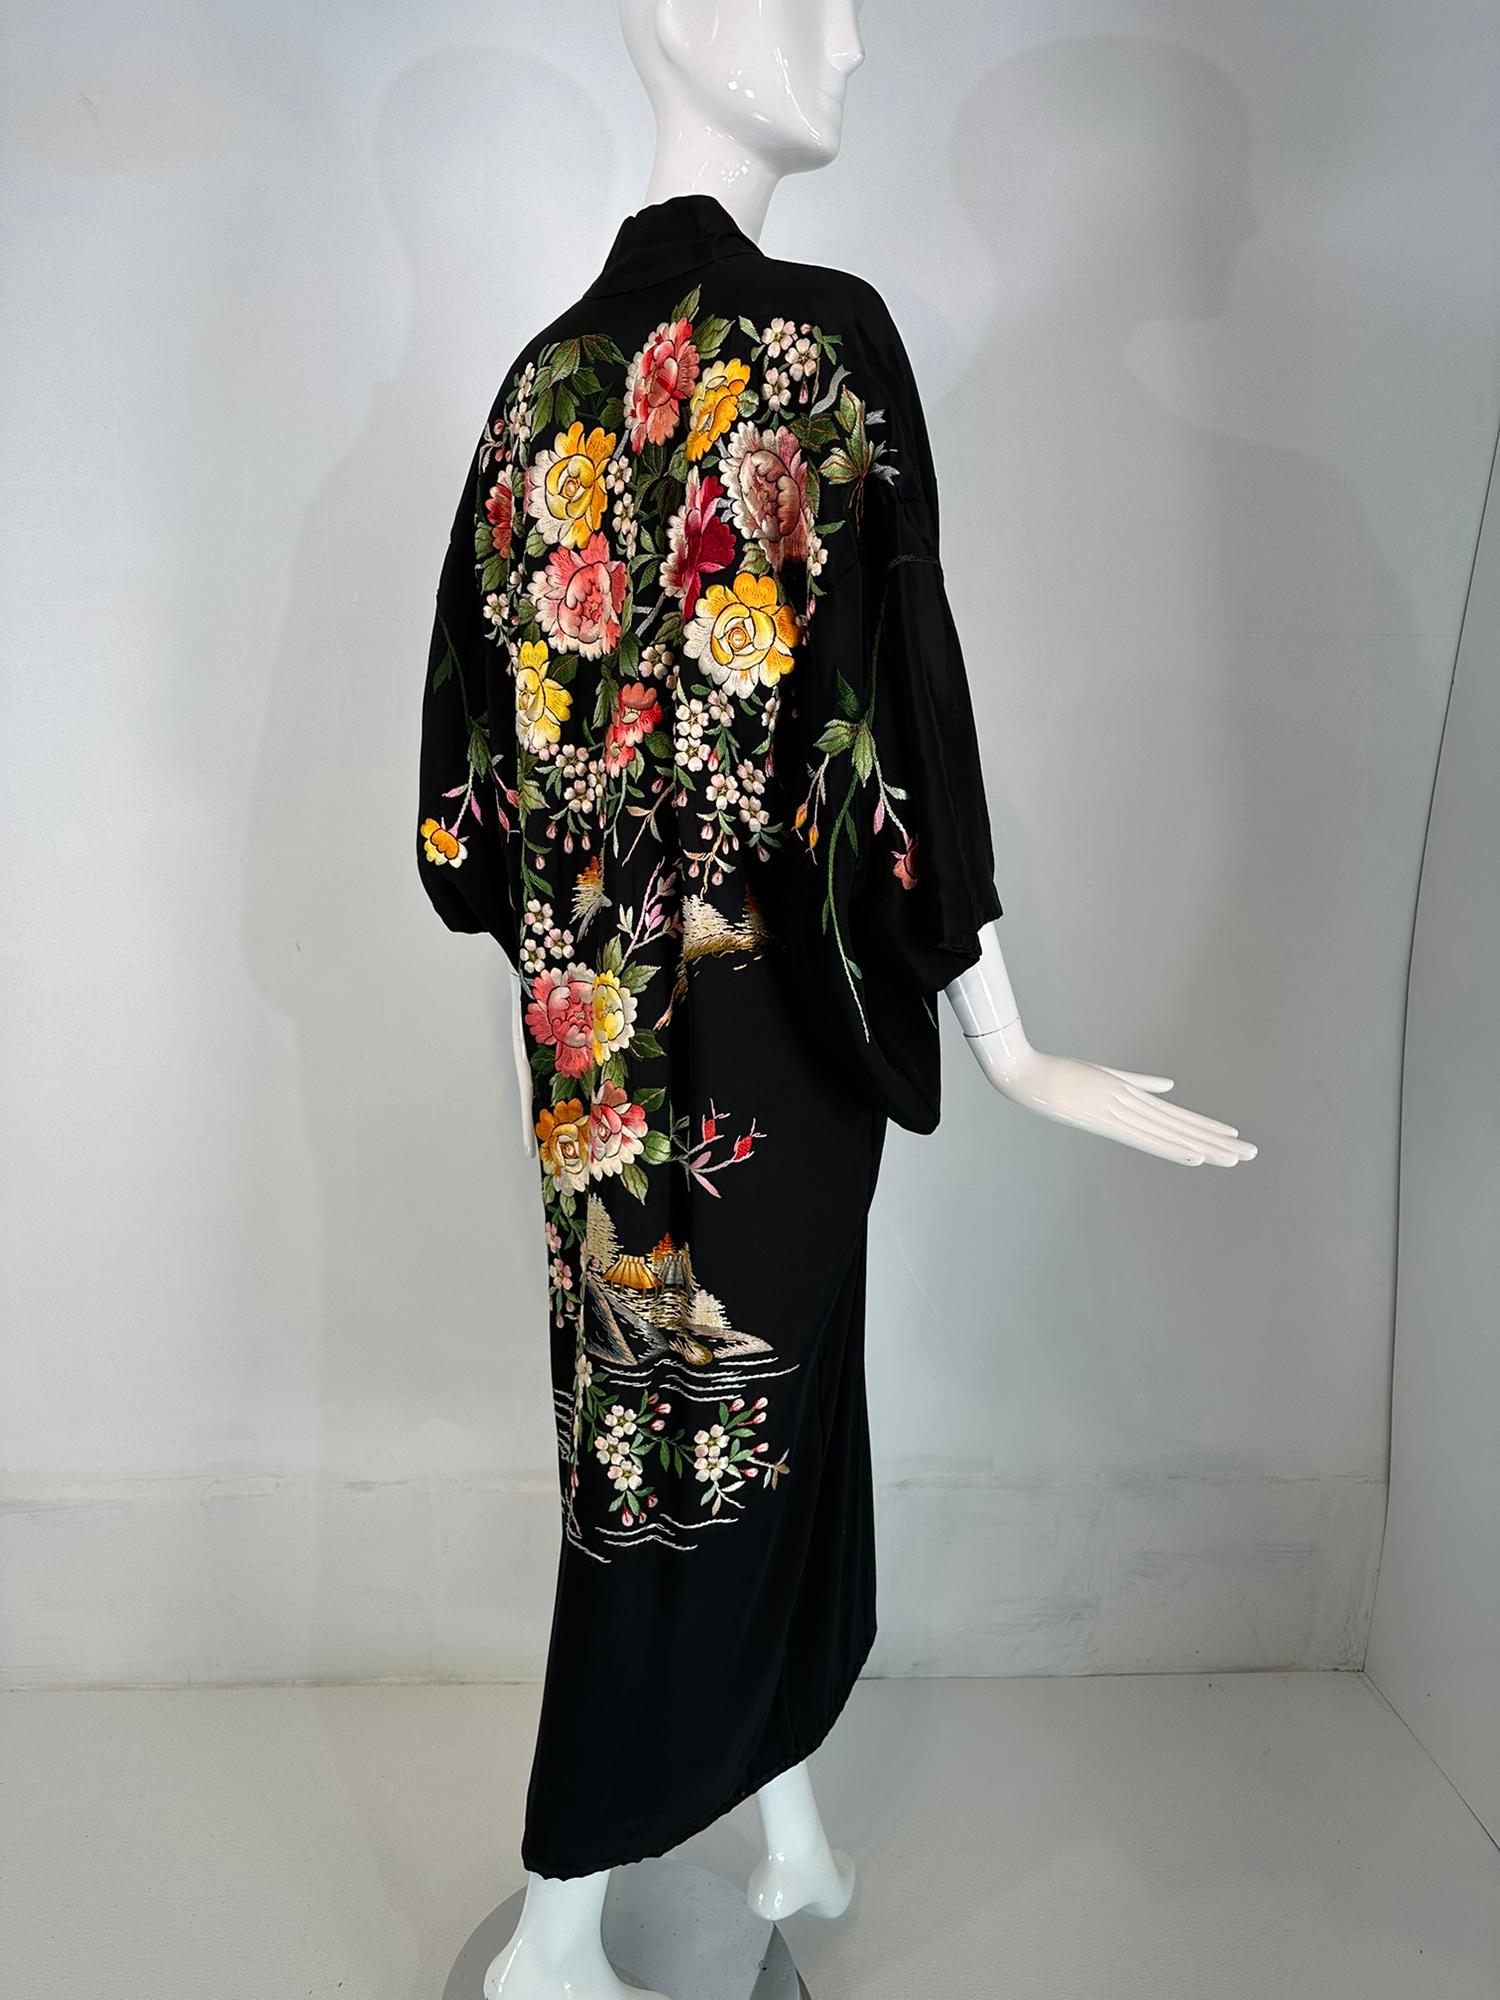 Vintage Black Rayon Heavily Floral Embroidered Kimono Robe 1930s-40s For Sale 6